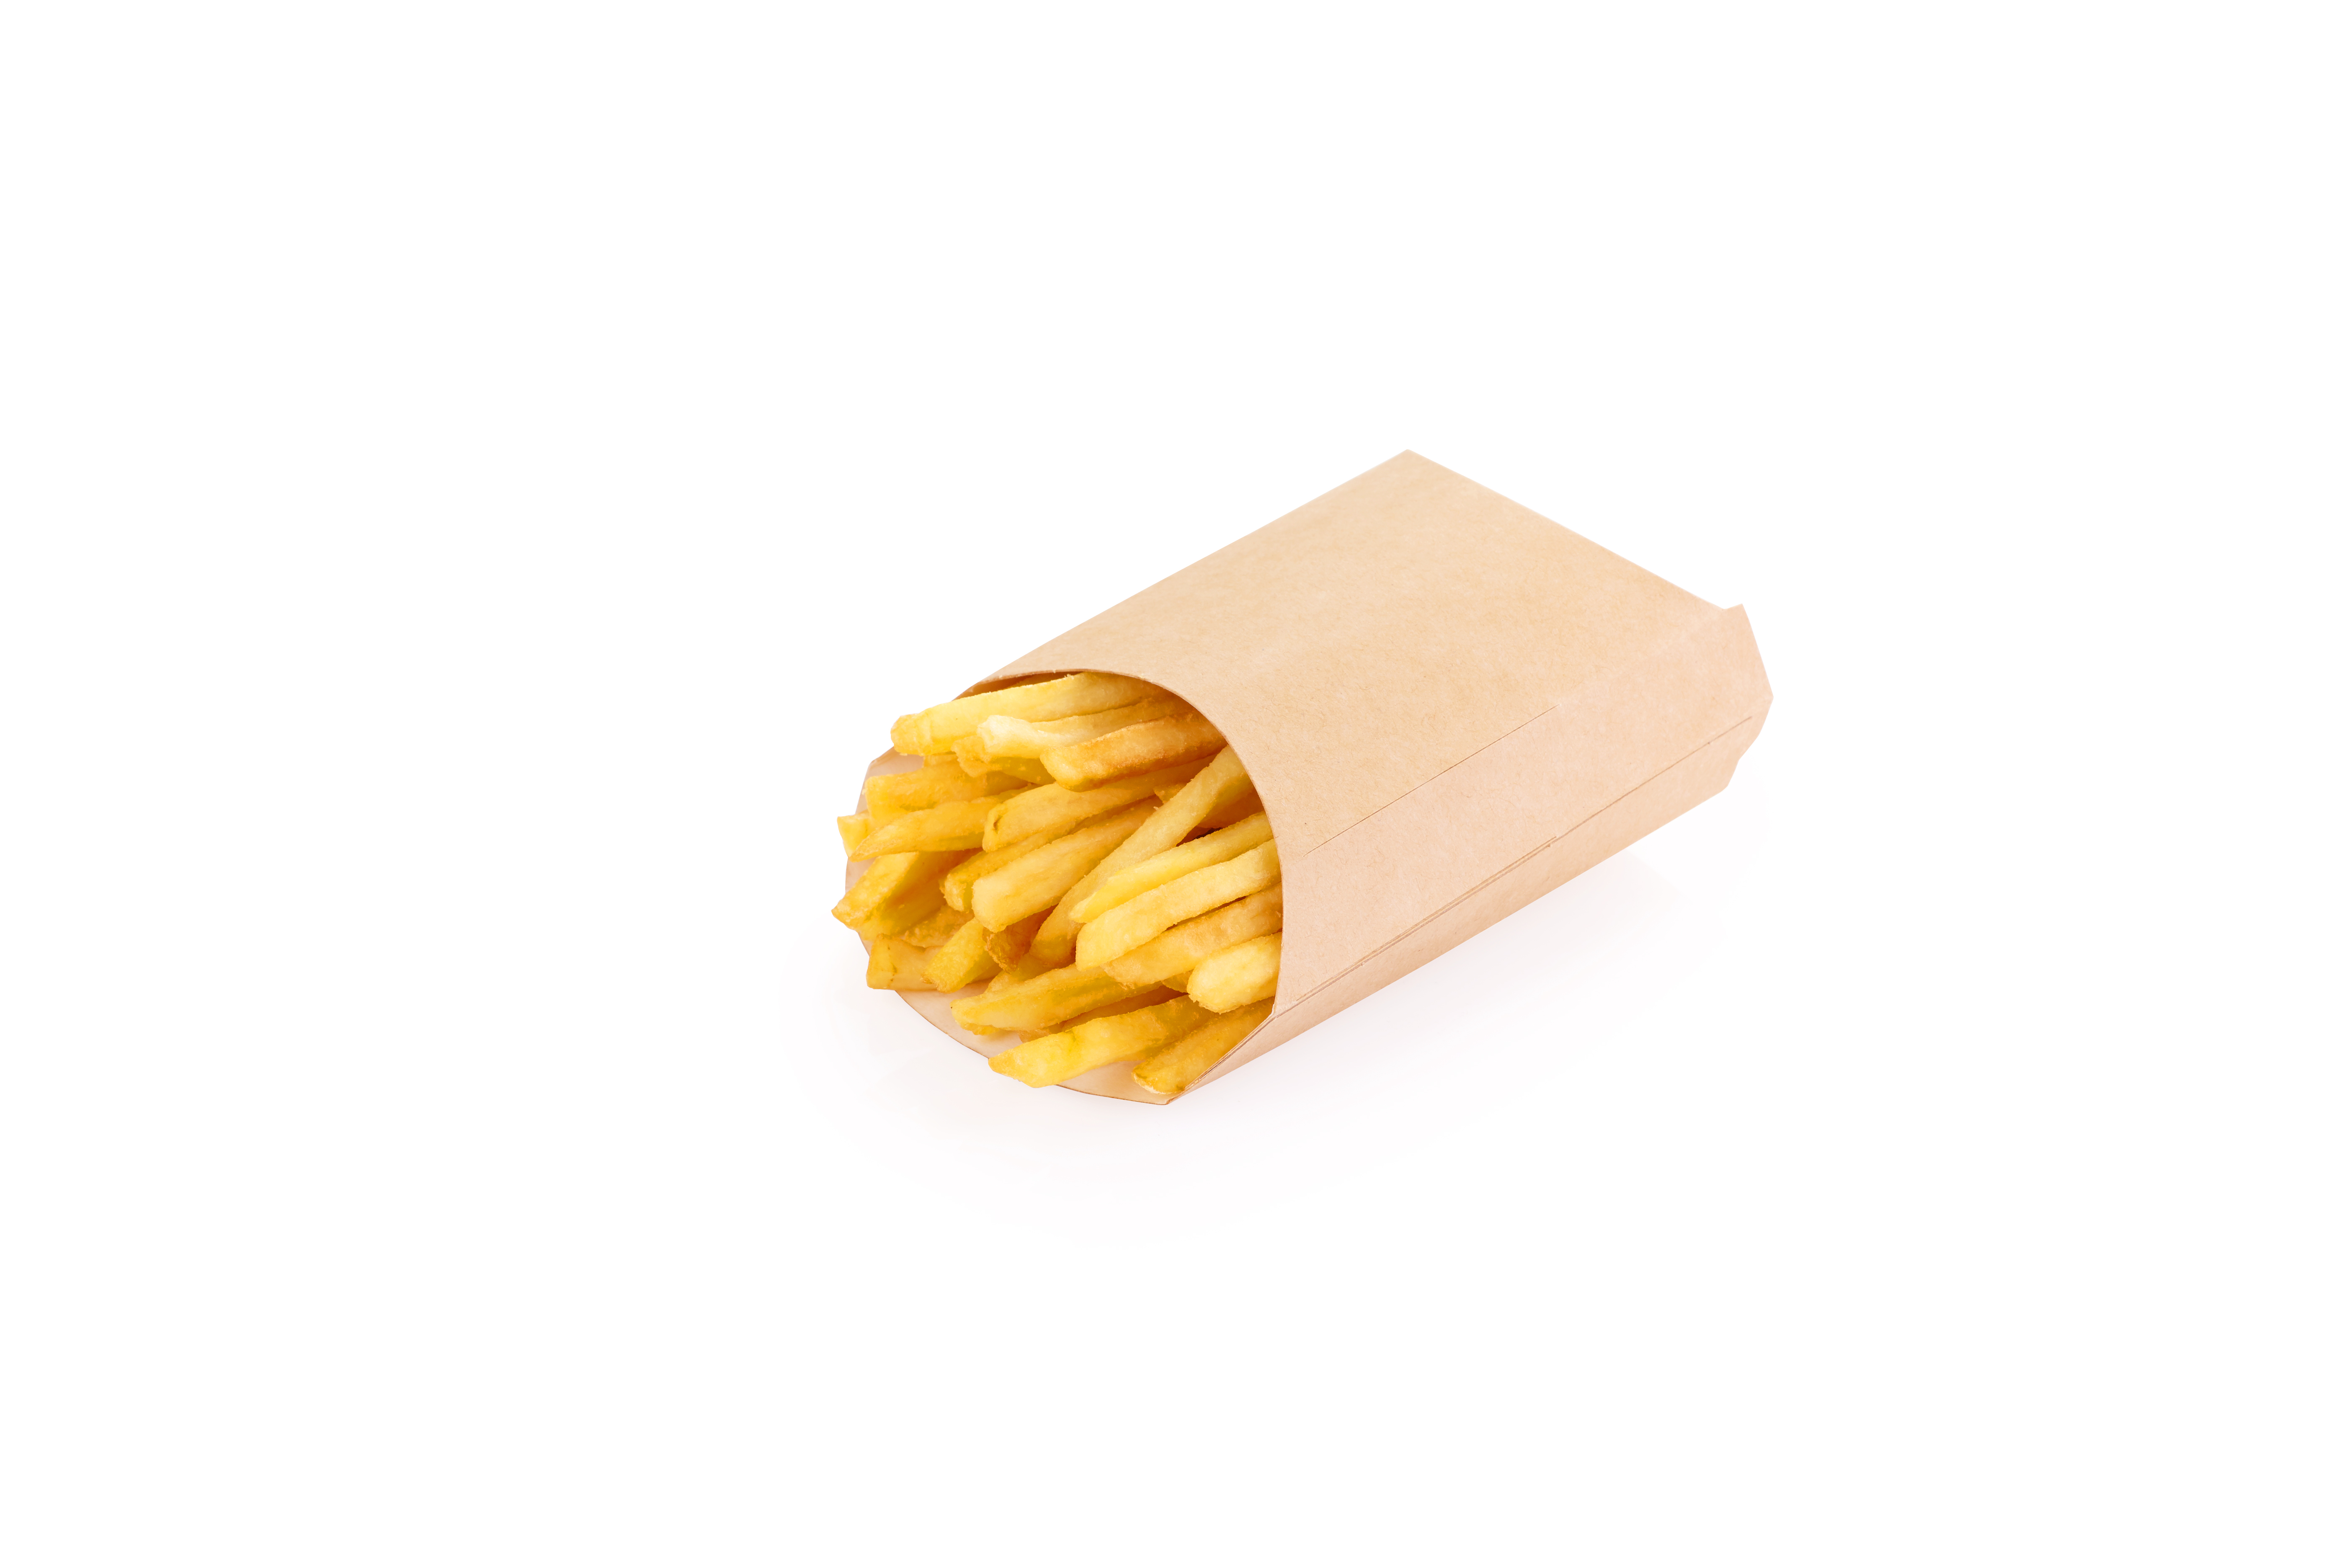 OSQ FRY M packaging for French fries